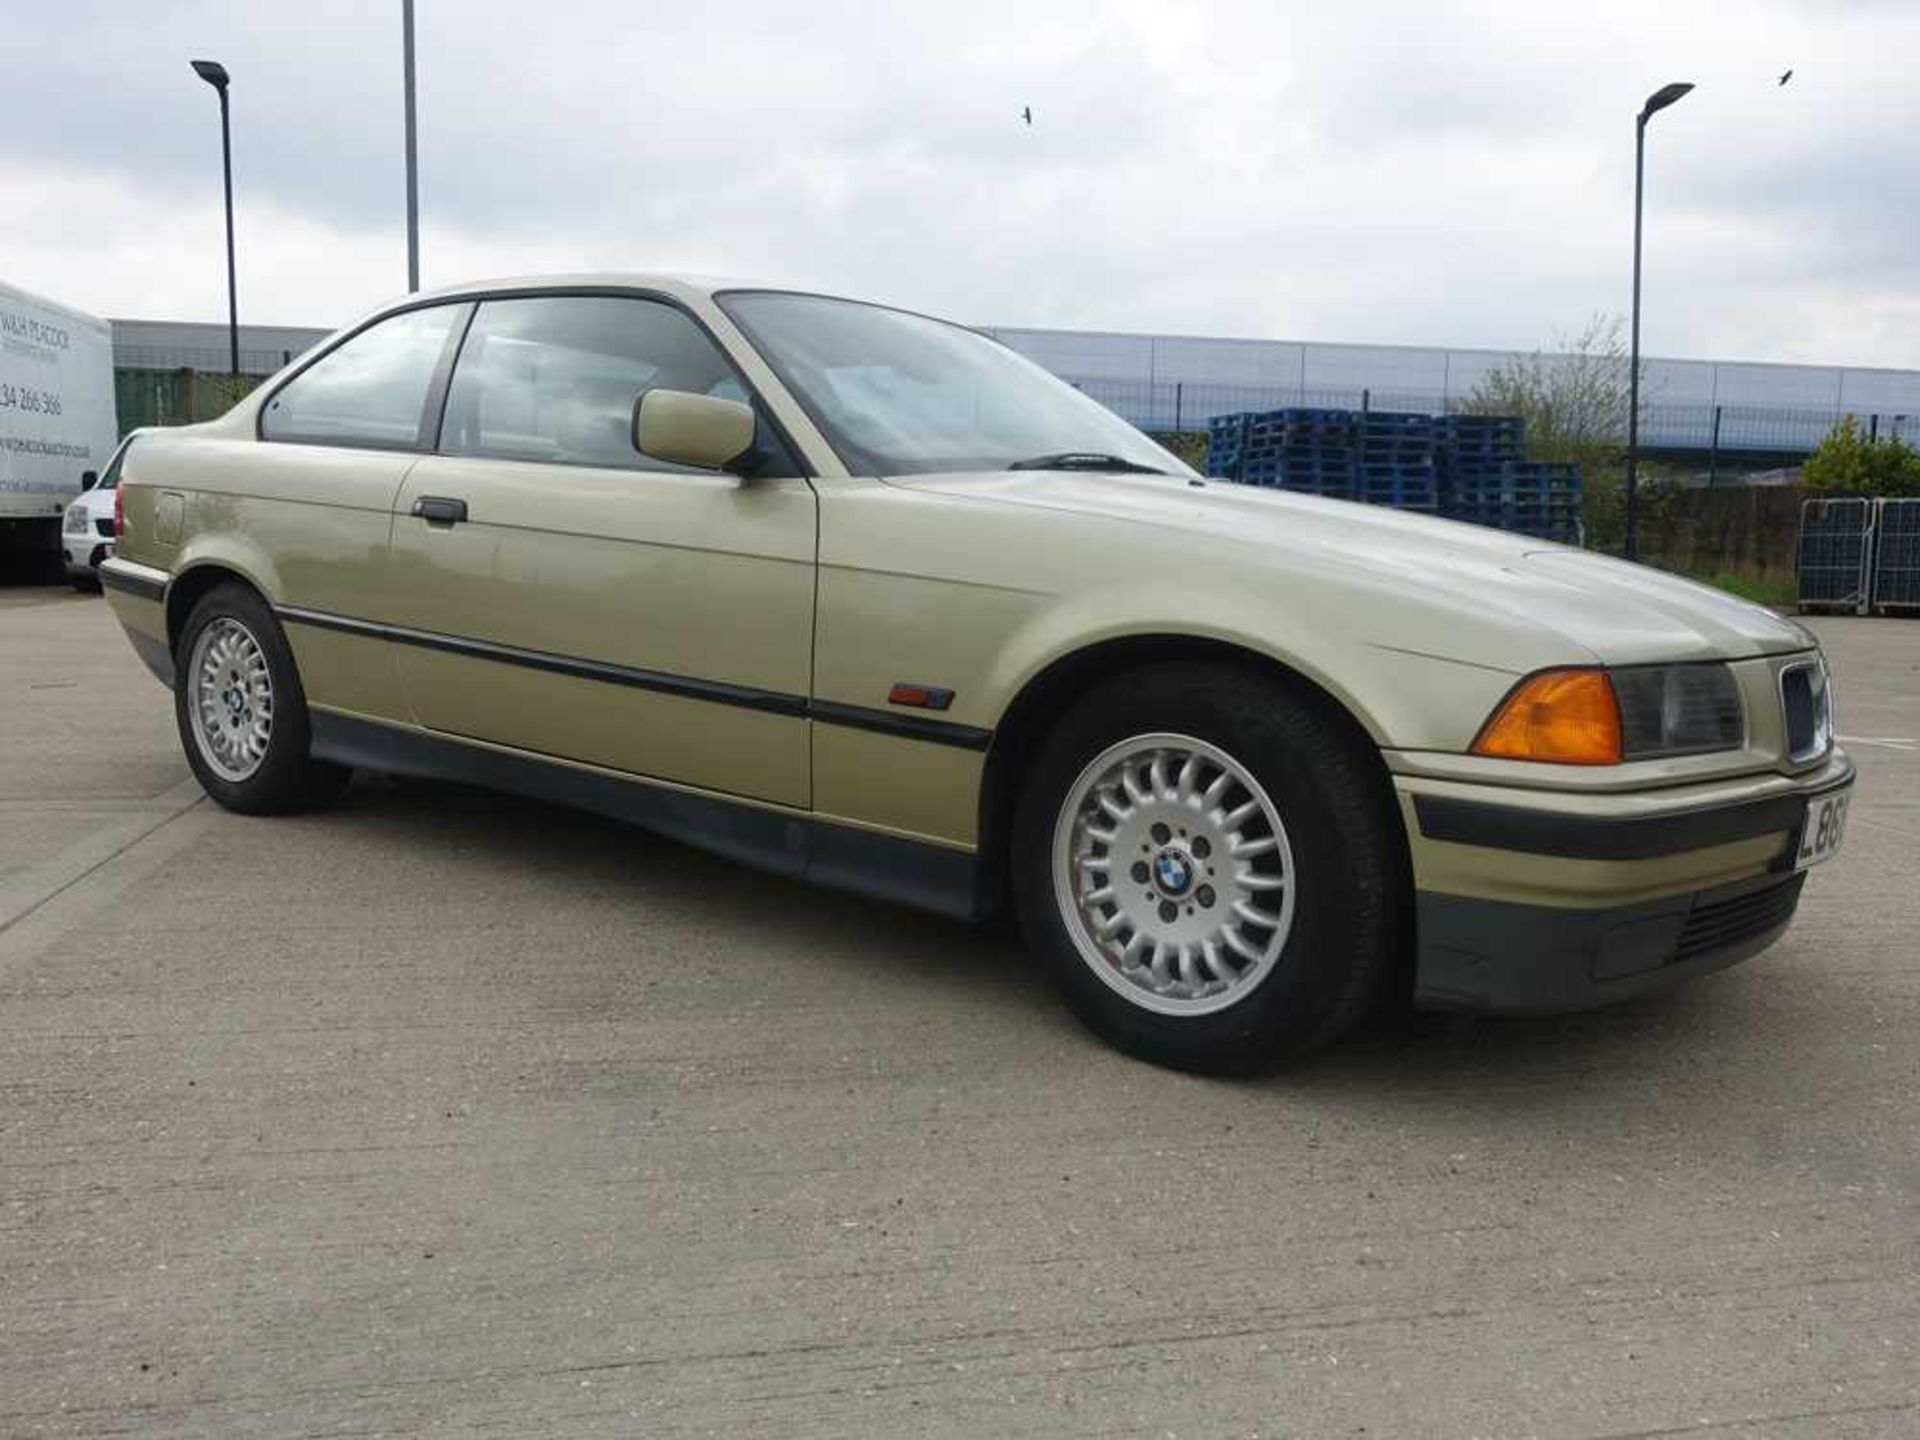 BMW 318 i S Auto Coupe in gold, first registered 16.04.1994, registration plate L868 FKR, 2 door, - Image 2 of 12